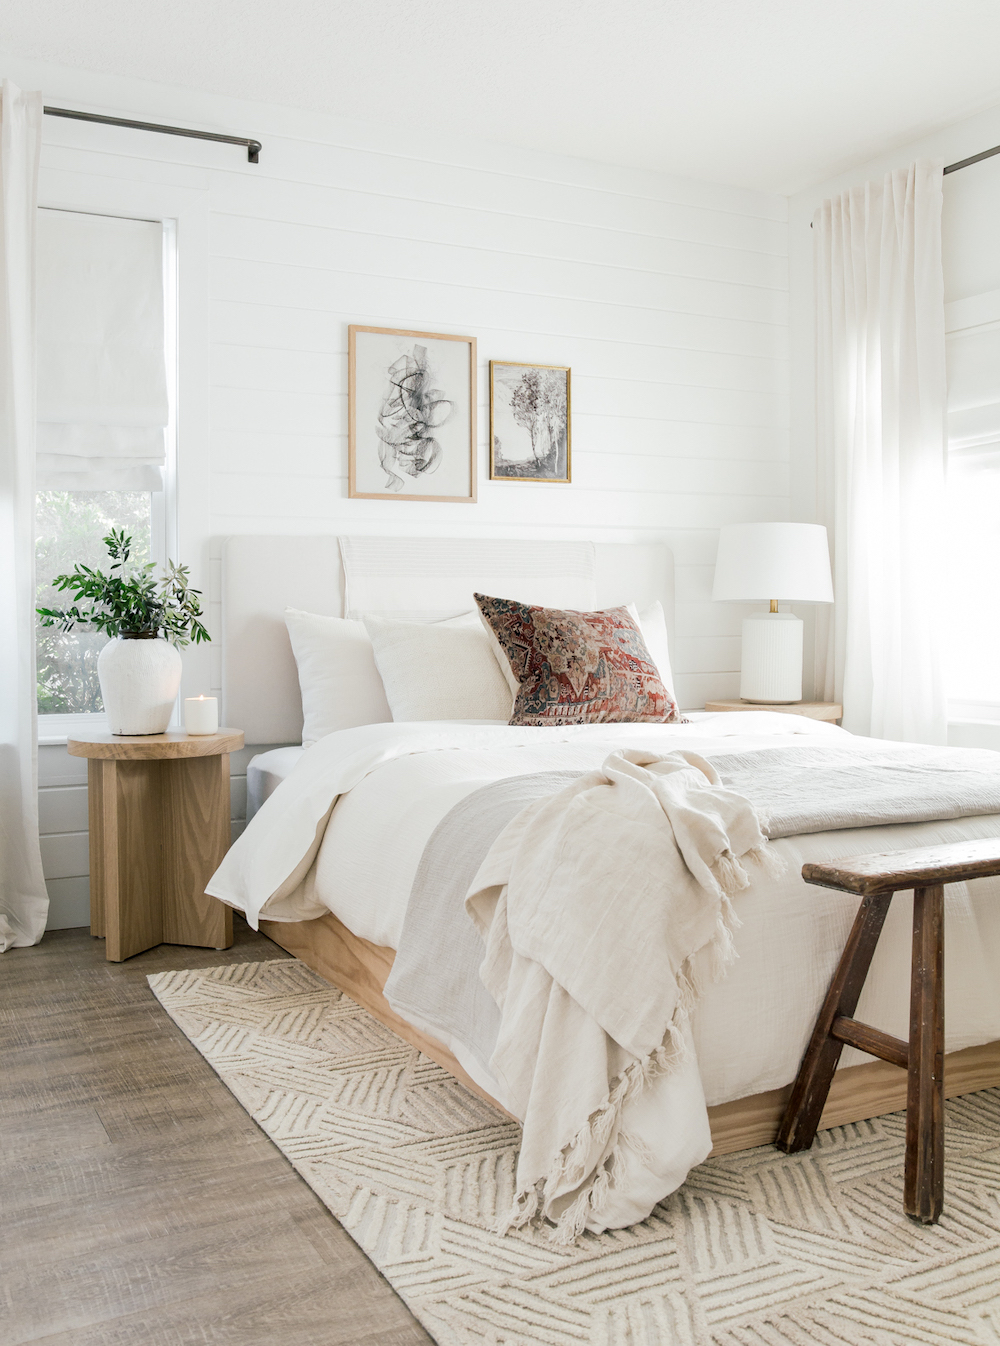 a bedroom with white bedding, statement pillows and art, and a textured rug